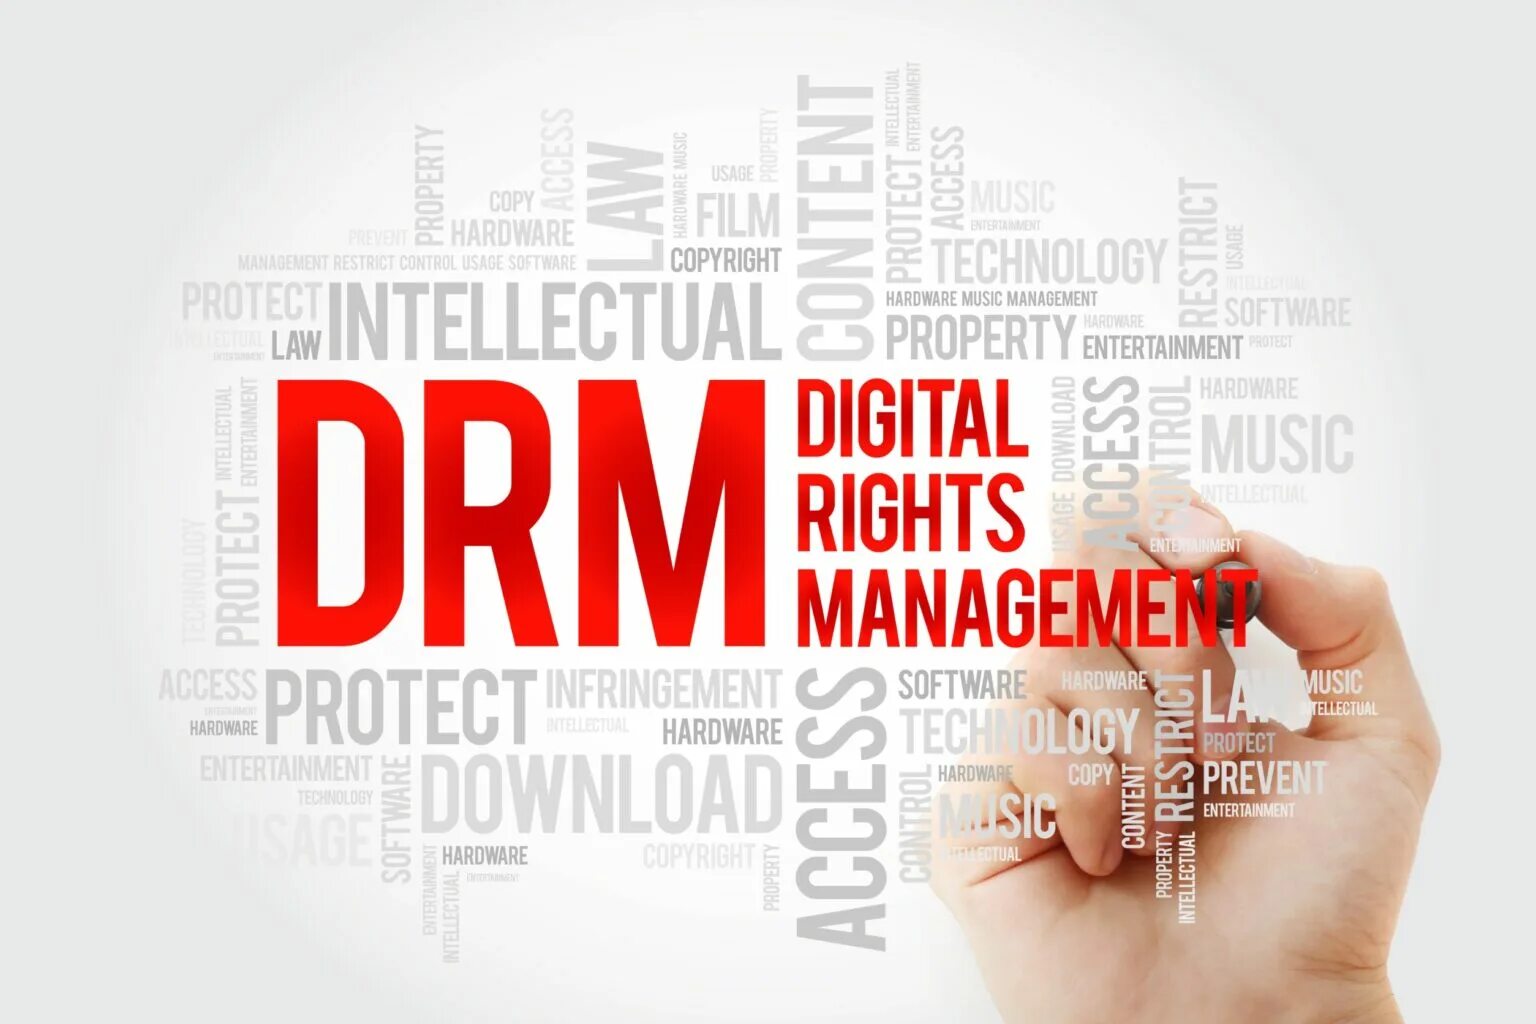 Digital rights Management. Digital rights. What is Digital rights. Digital rights photo. Rights management